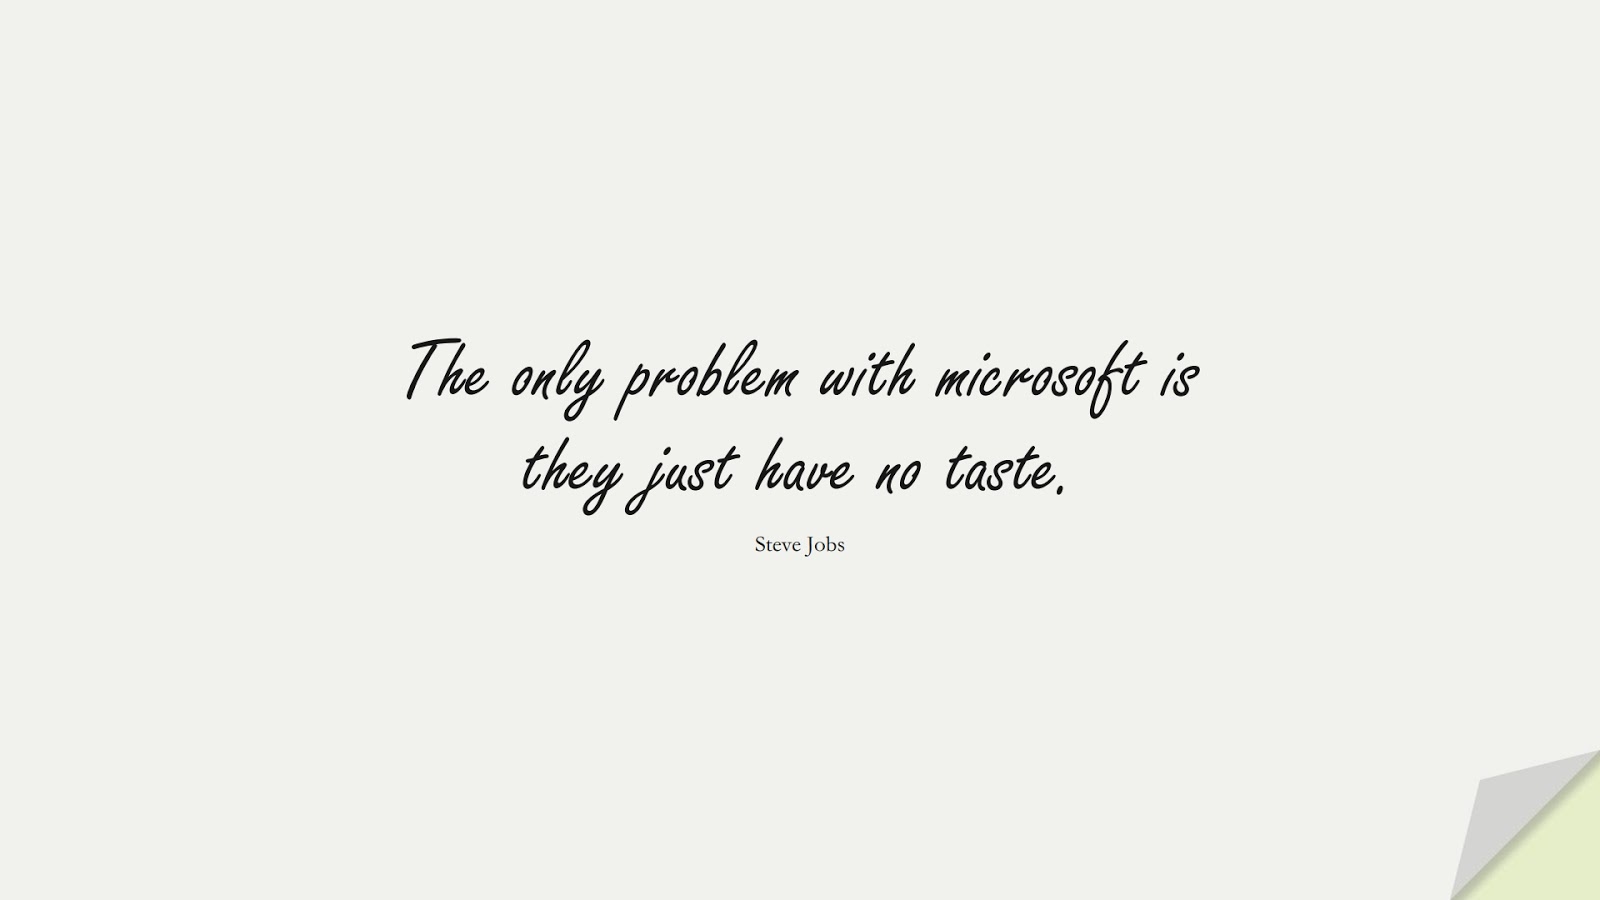 The only problem with microsoft is they just have no taste. (Steve Jobs);  #SteveJobsQuotes